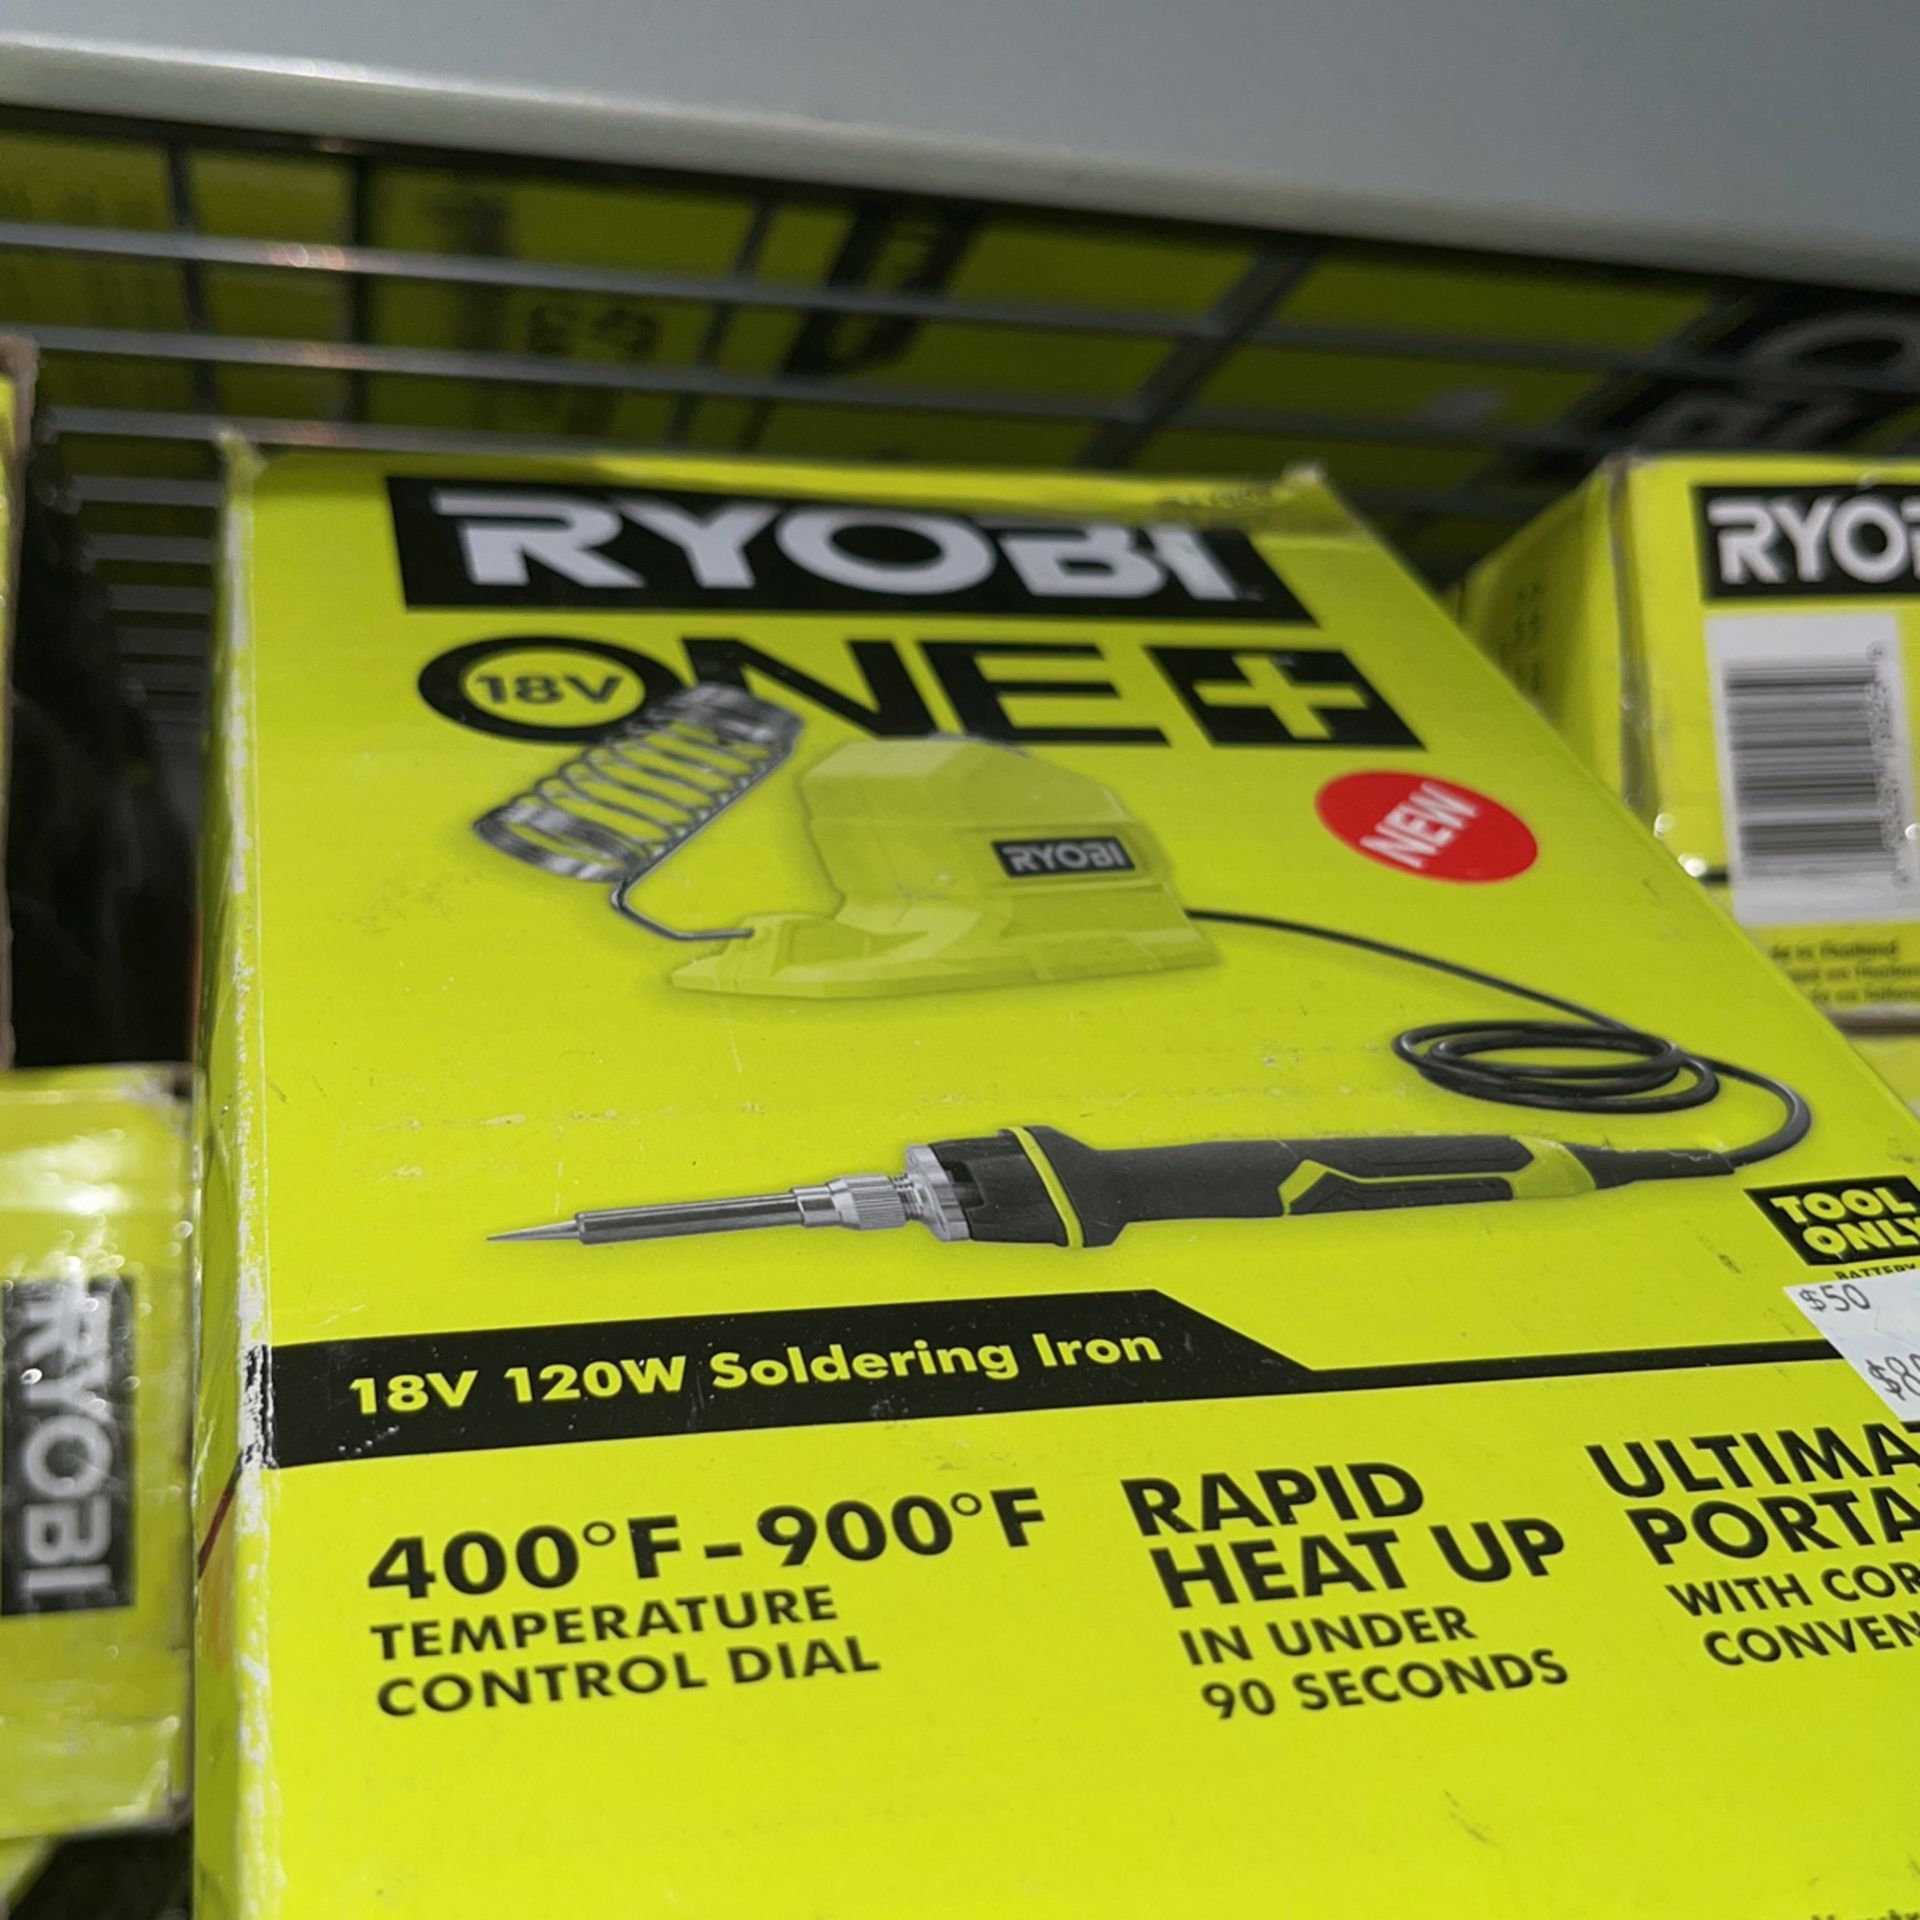 Ryobi 18 volt Soldering Iron 120W With Battery,Charger $80 